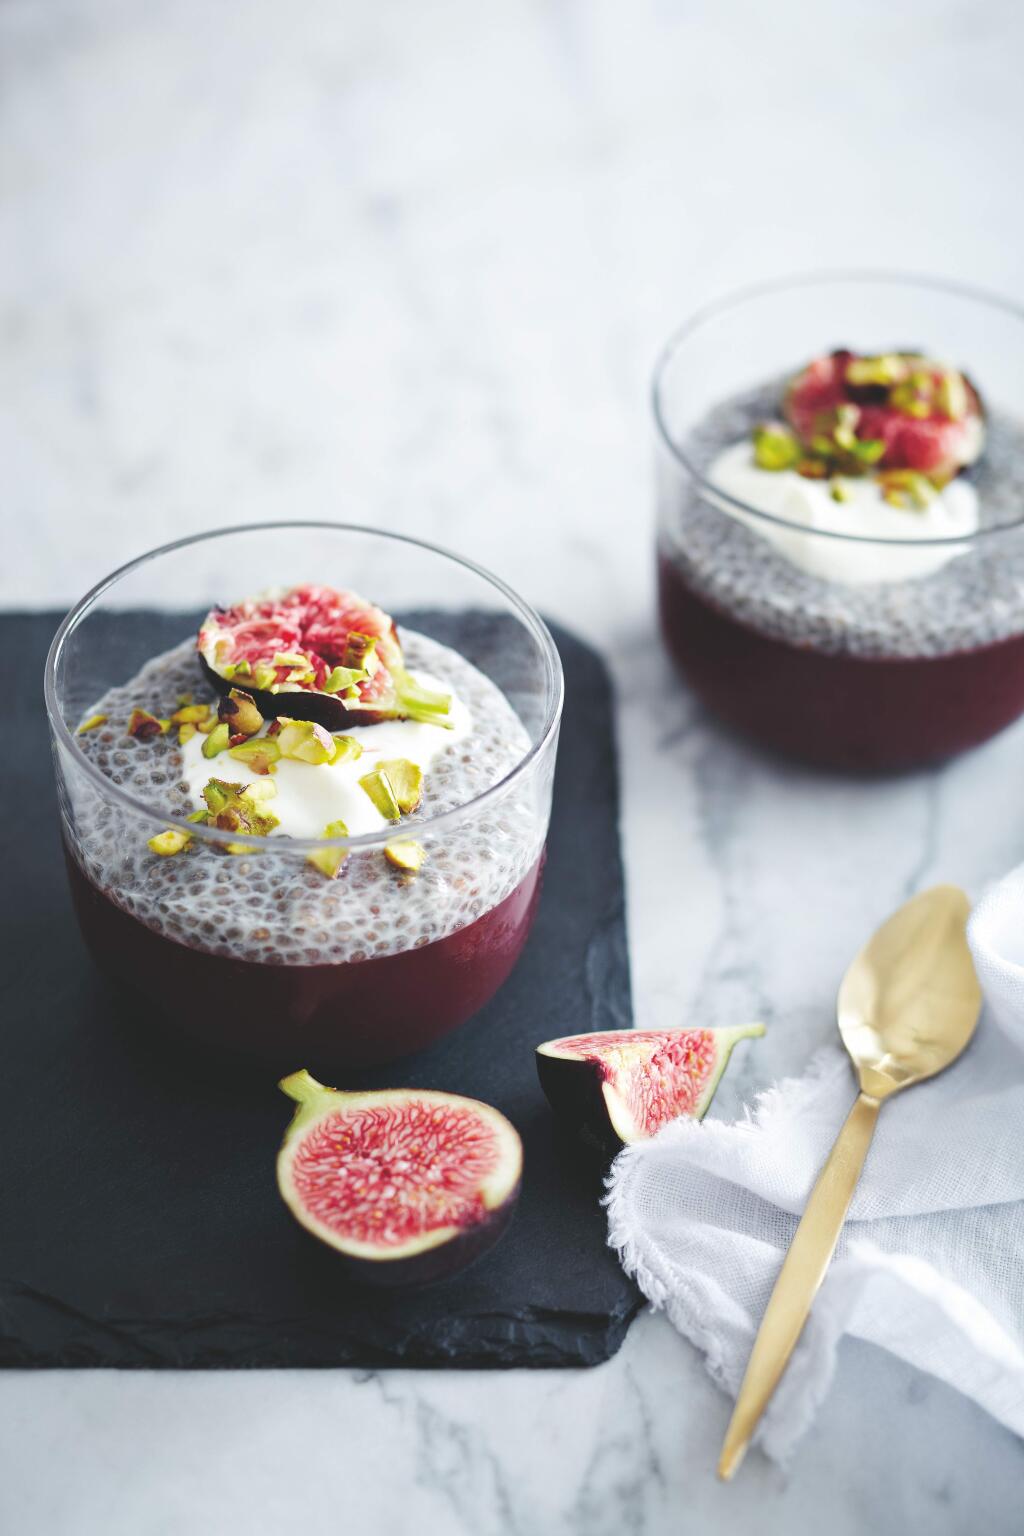 MANJA WACHSMUTH from “Spice Heroes” by Natasha MacAllerPomegranate Pistachio Parfait includes chia seeds and ruby-red pomegranate juice in an easy-to-make pudding sweetened with honey.